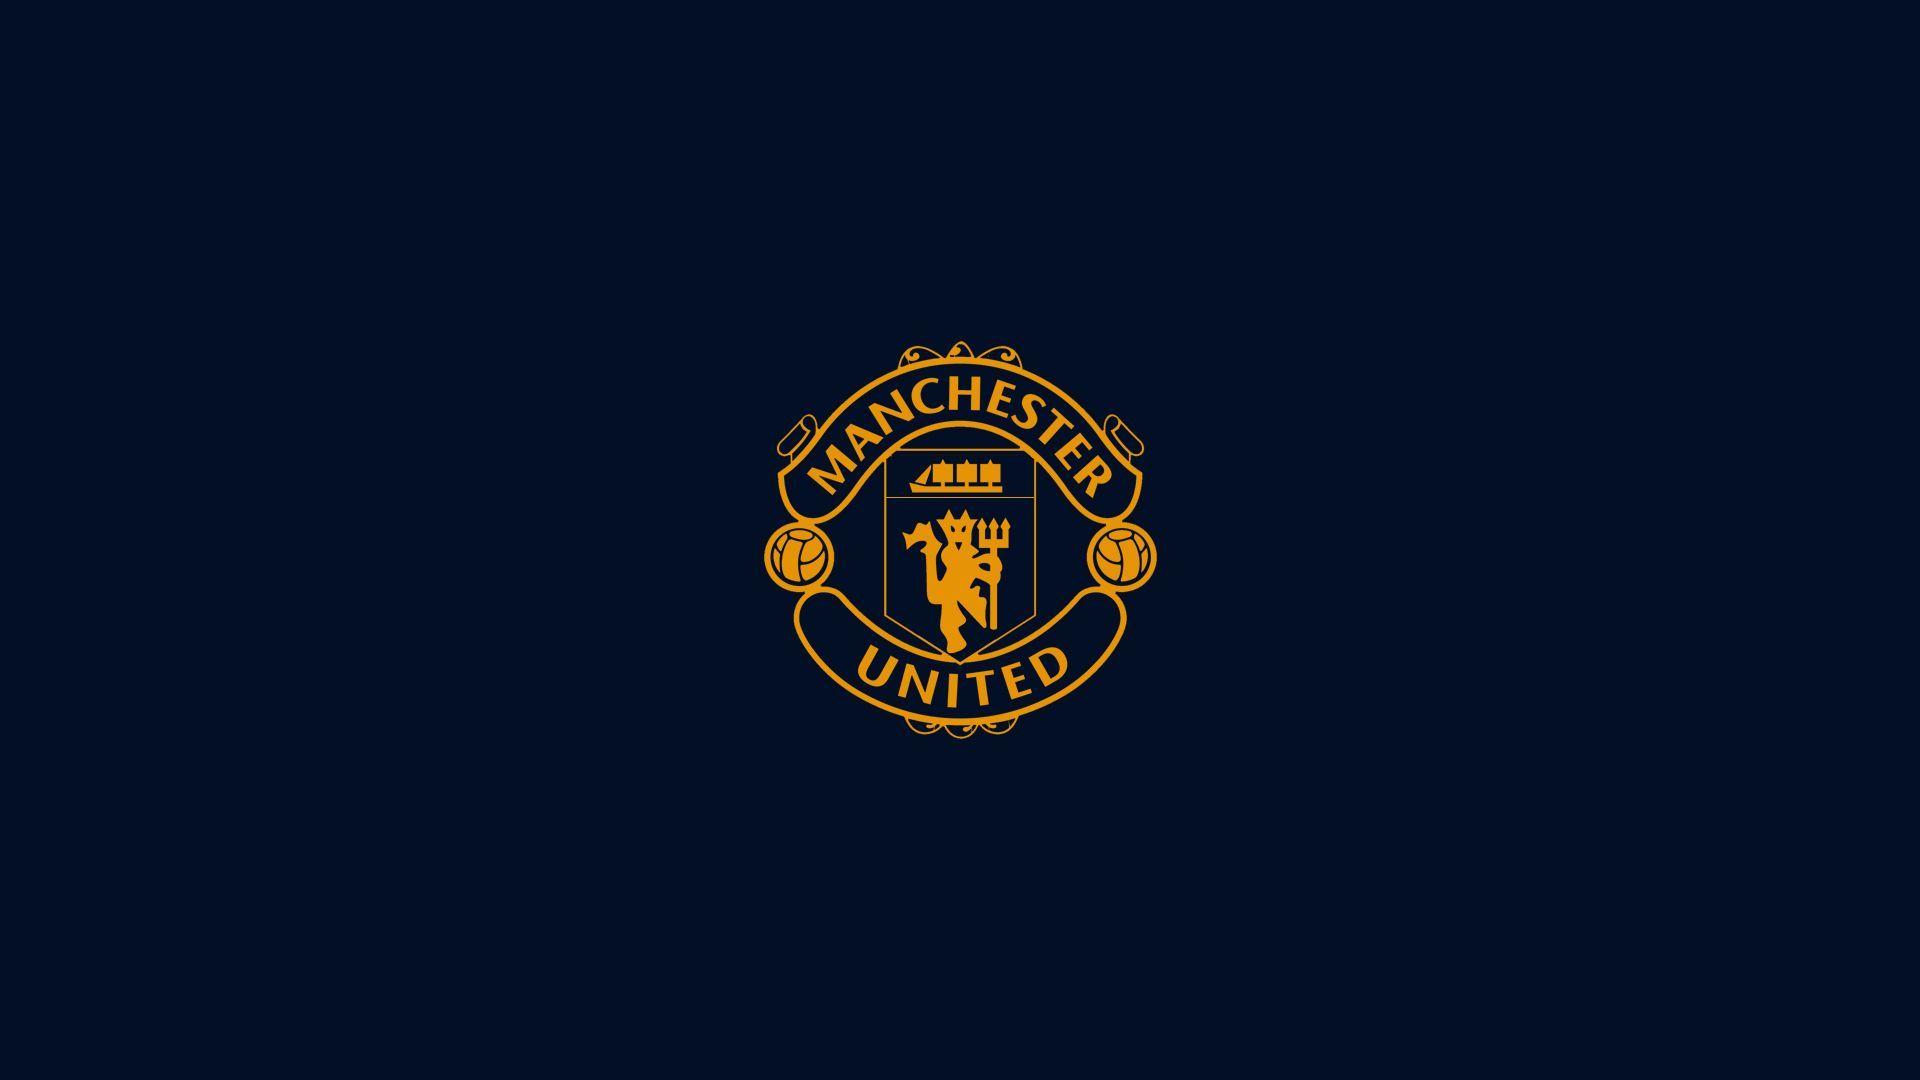 Free Manchester United Iphone Wallpaper Downloads 100 Manchester United  Iphone Wallpapers for FREE  Wallpaperscom